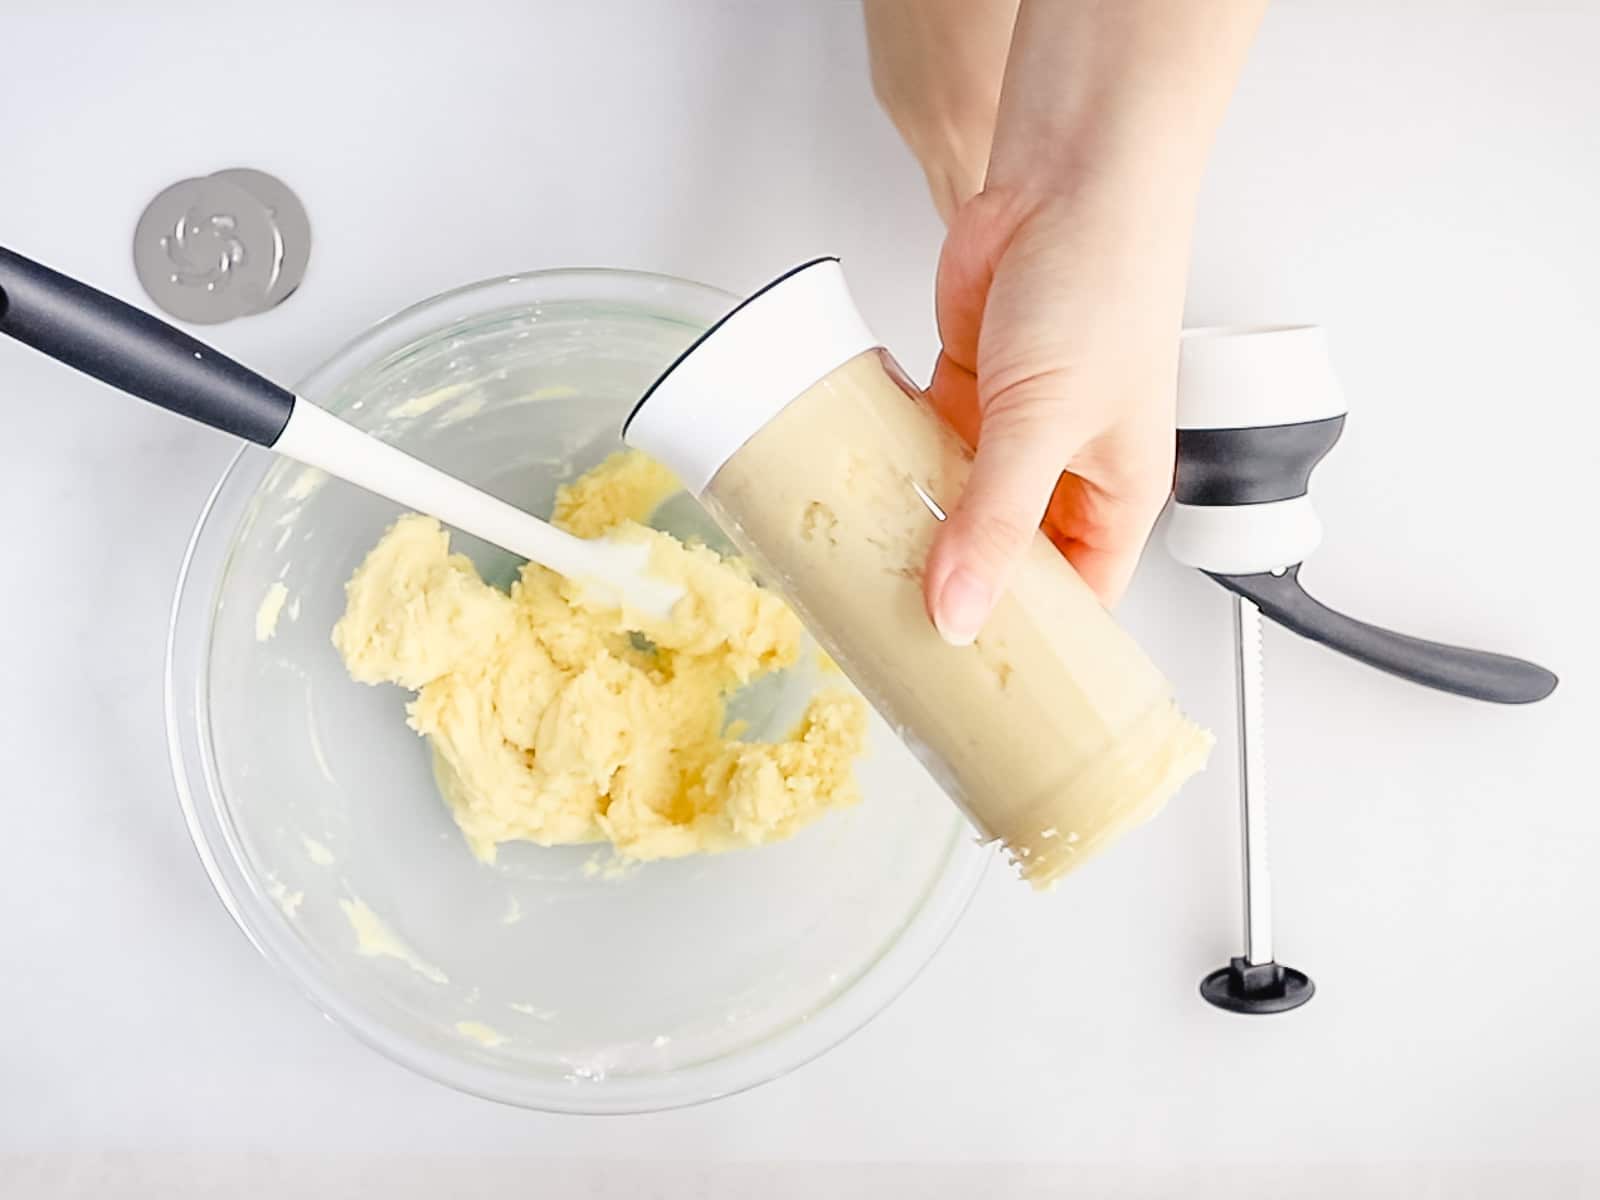 spritz cookie dough batter added to a spritz cookie press held by a hand